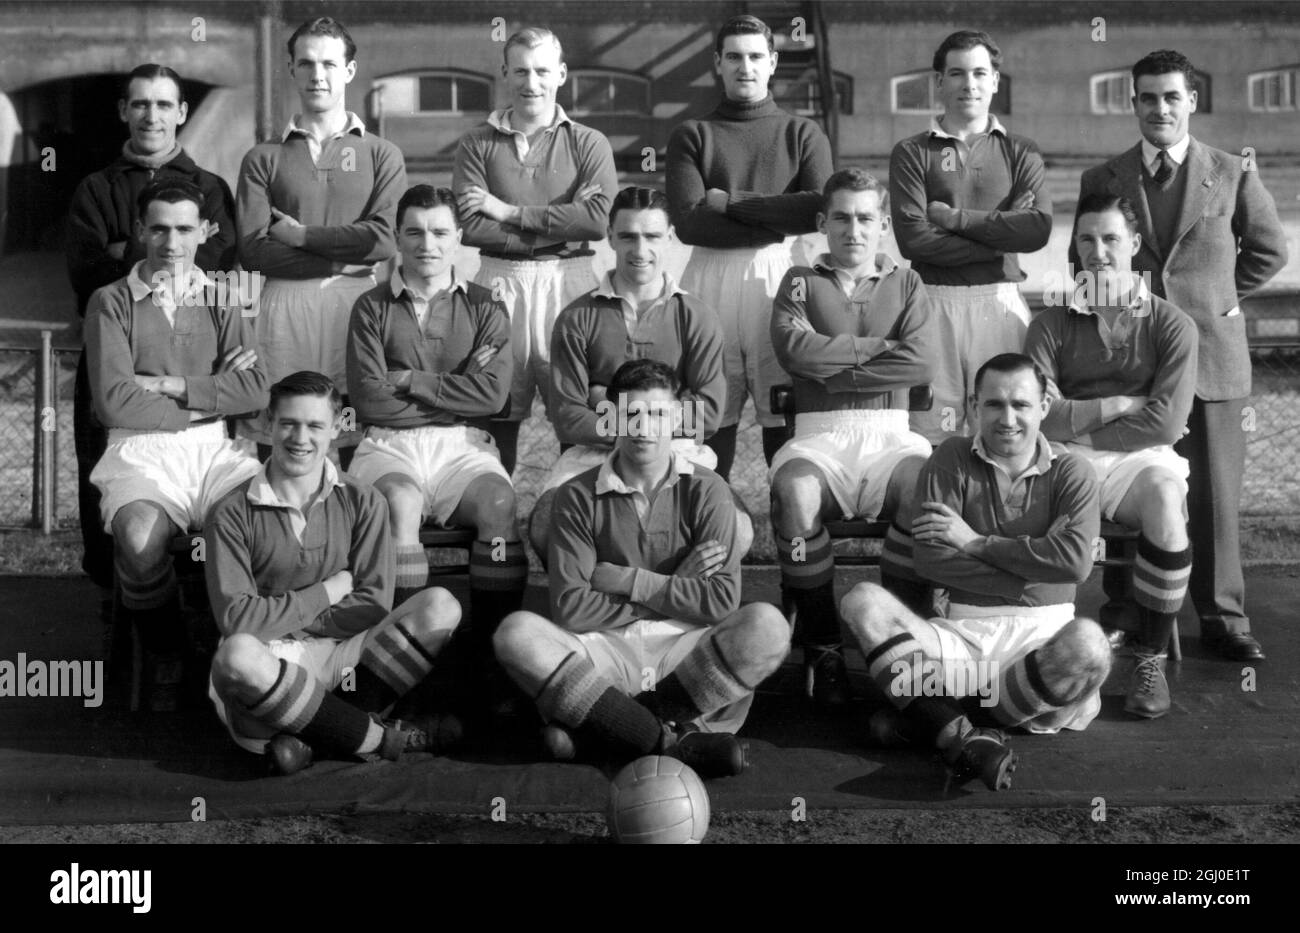 Chelsea Football Team Back Row: L.Goulden (coach), W.Dickson, R.Williams, W.Robertson, S.Tickridge and N.Smith (trainer) Second Row: S.D'arcy, K.Armstrong, R.Campbell (captain), R.Bentley, J.Harris. Seated: W.Gray, R.Smith, and S.Bathgate. 13th March 1952 Stock Photo